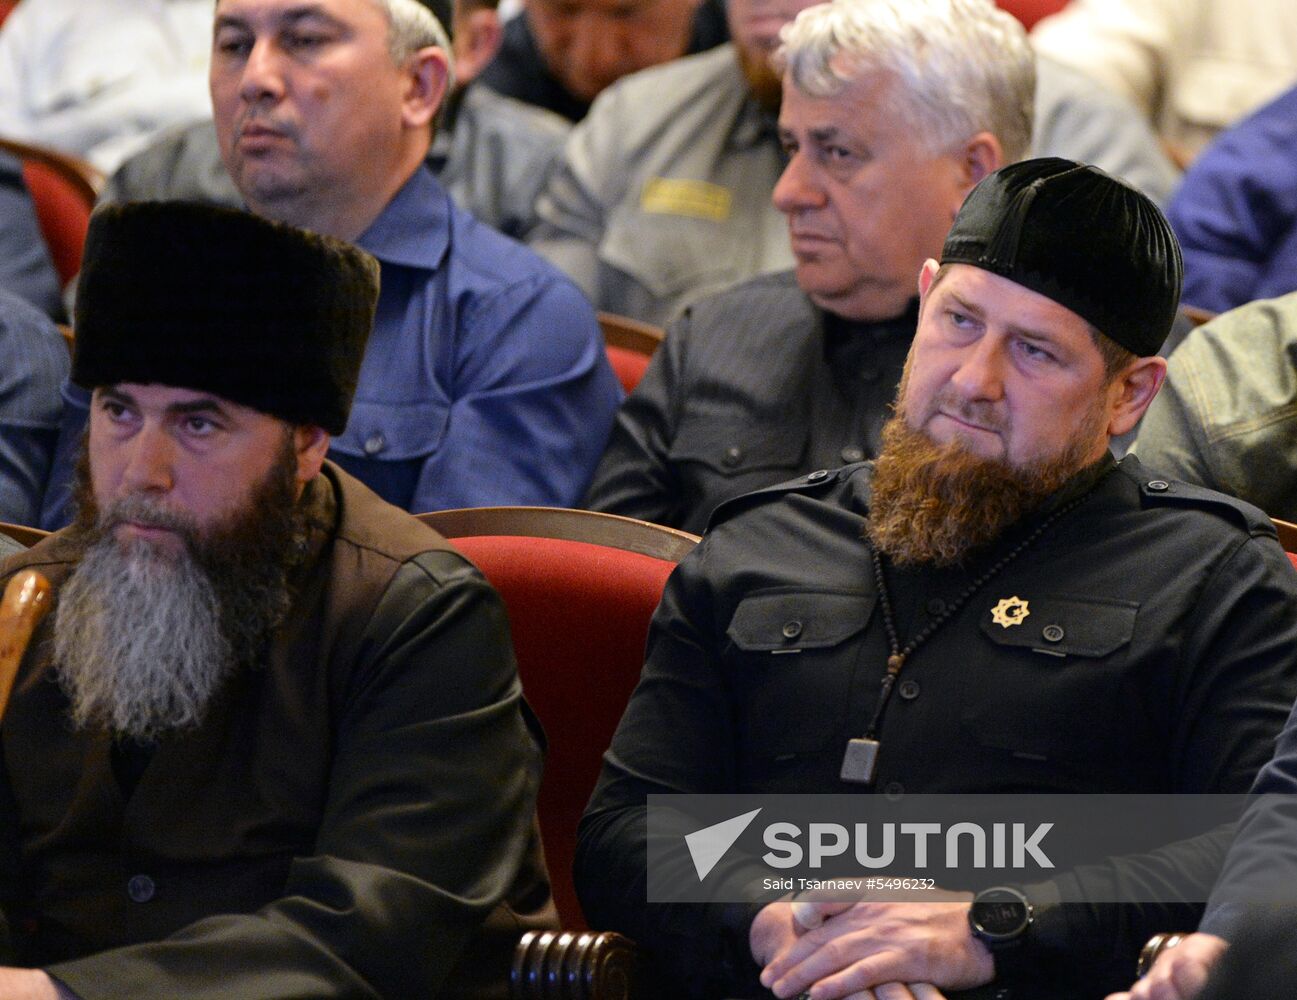 Day of Remembrance and Mourning in Chechnya